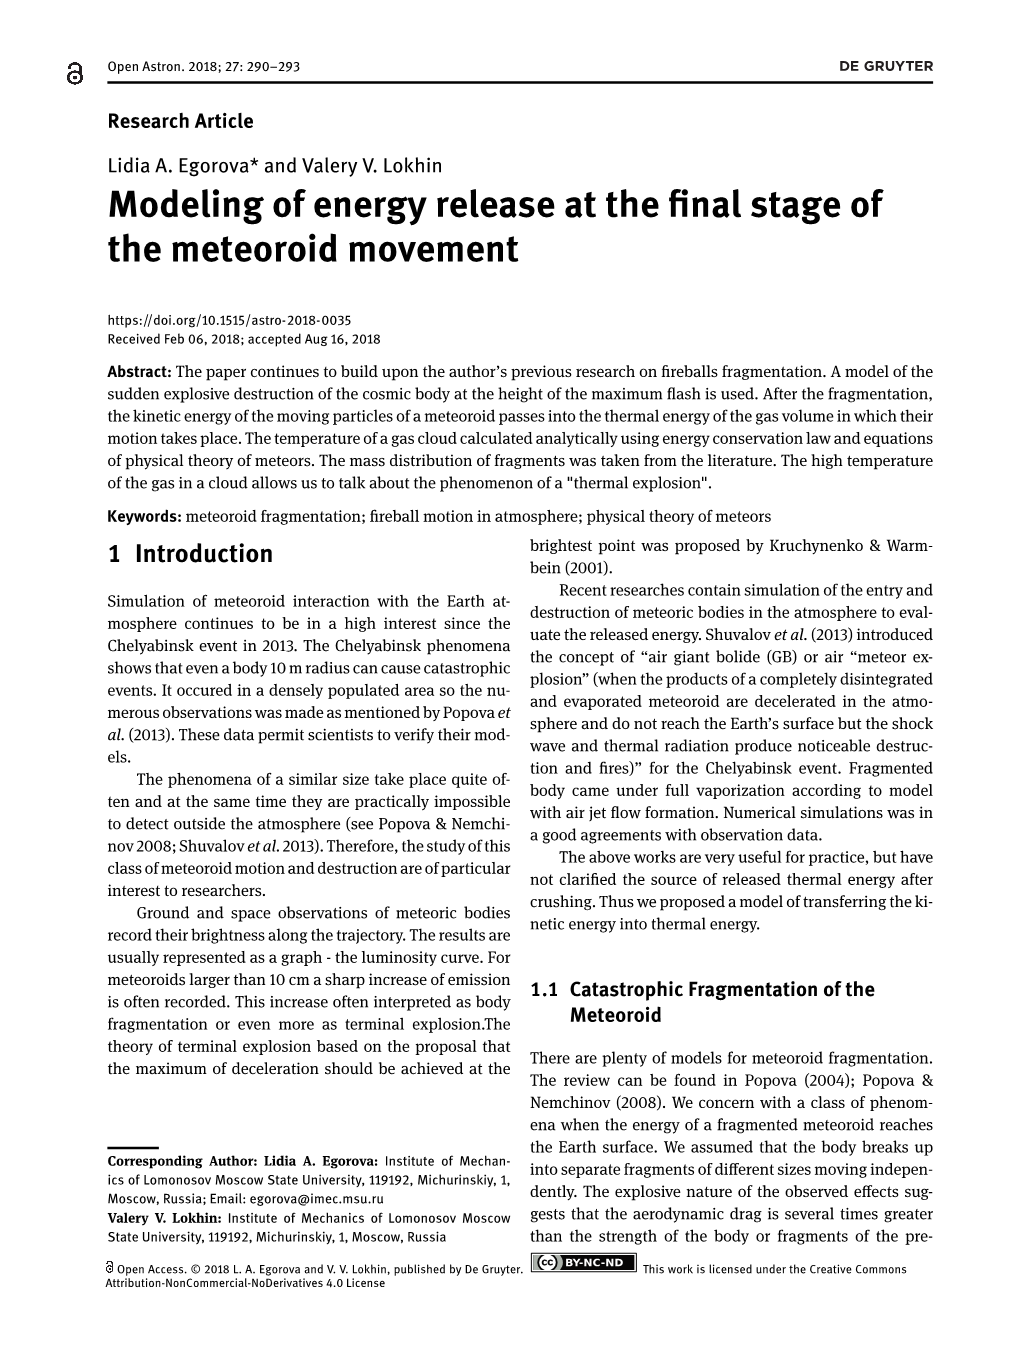 Modeling of Energy Release at the Final Stage of the Meteoroid Movement